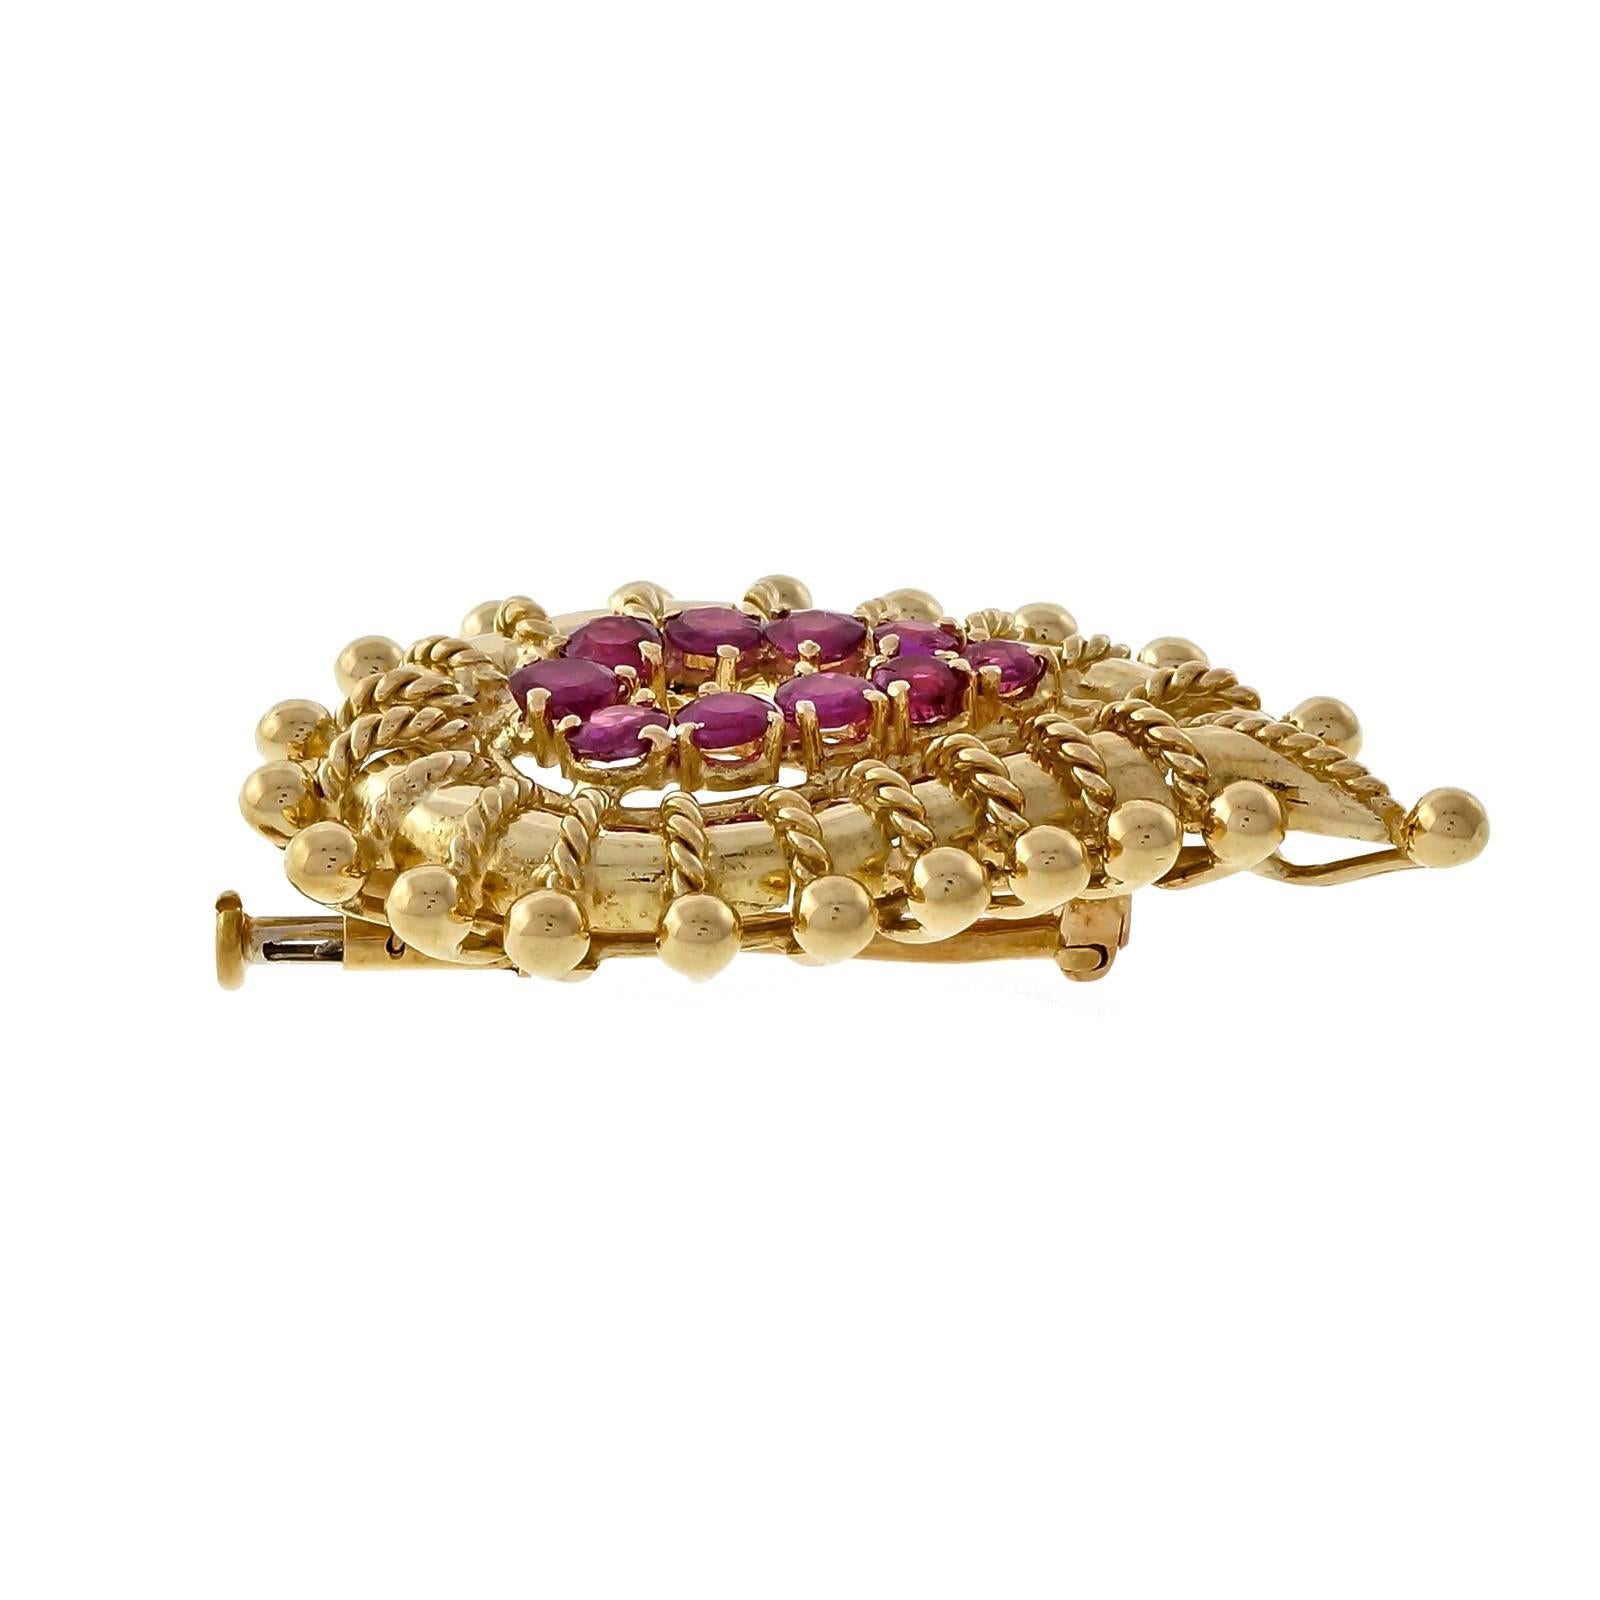 1960’s Tiffany & Co. round ruby solid 18k yellow gold brooch. 

10 round pinkish red Rubies, approx. total weight 1.60cts, MI
18k yellow gold
Tested and stamped: 18k
Hallmark: Tiffany Italy
10.1 grams
Top to bottom: 37.73mm or 1.49 inches
Width: